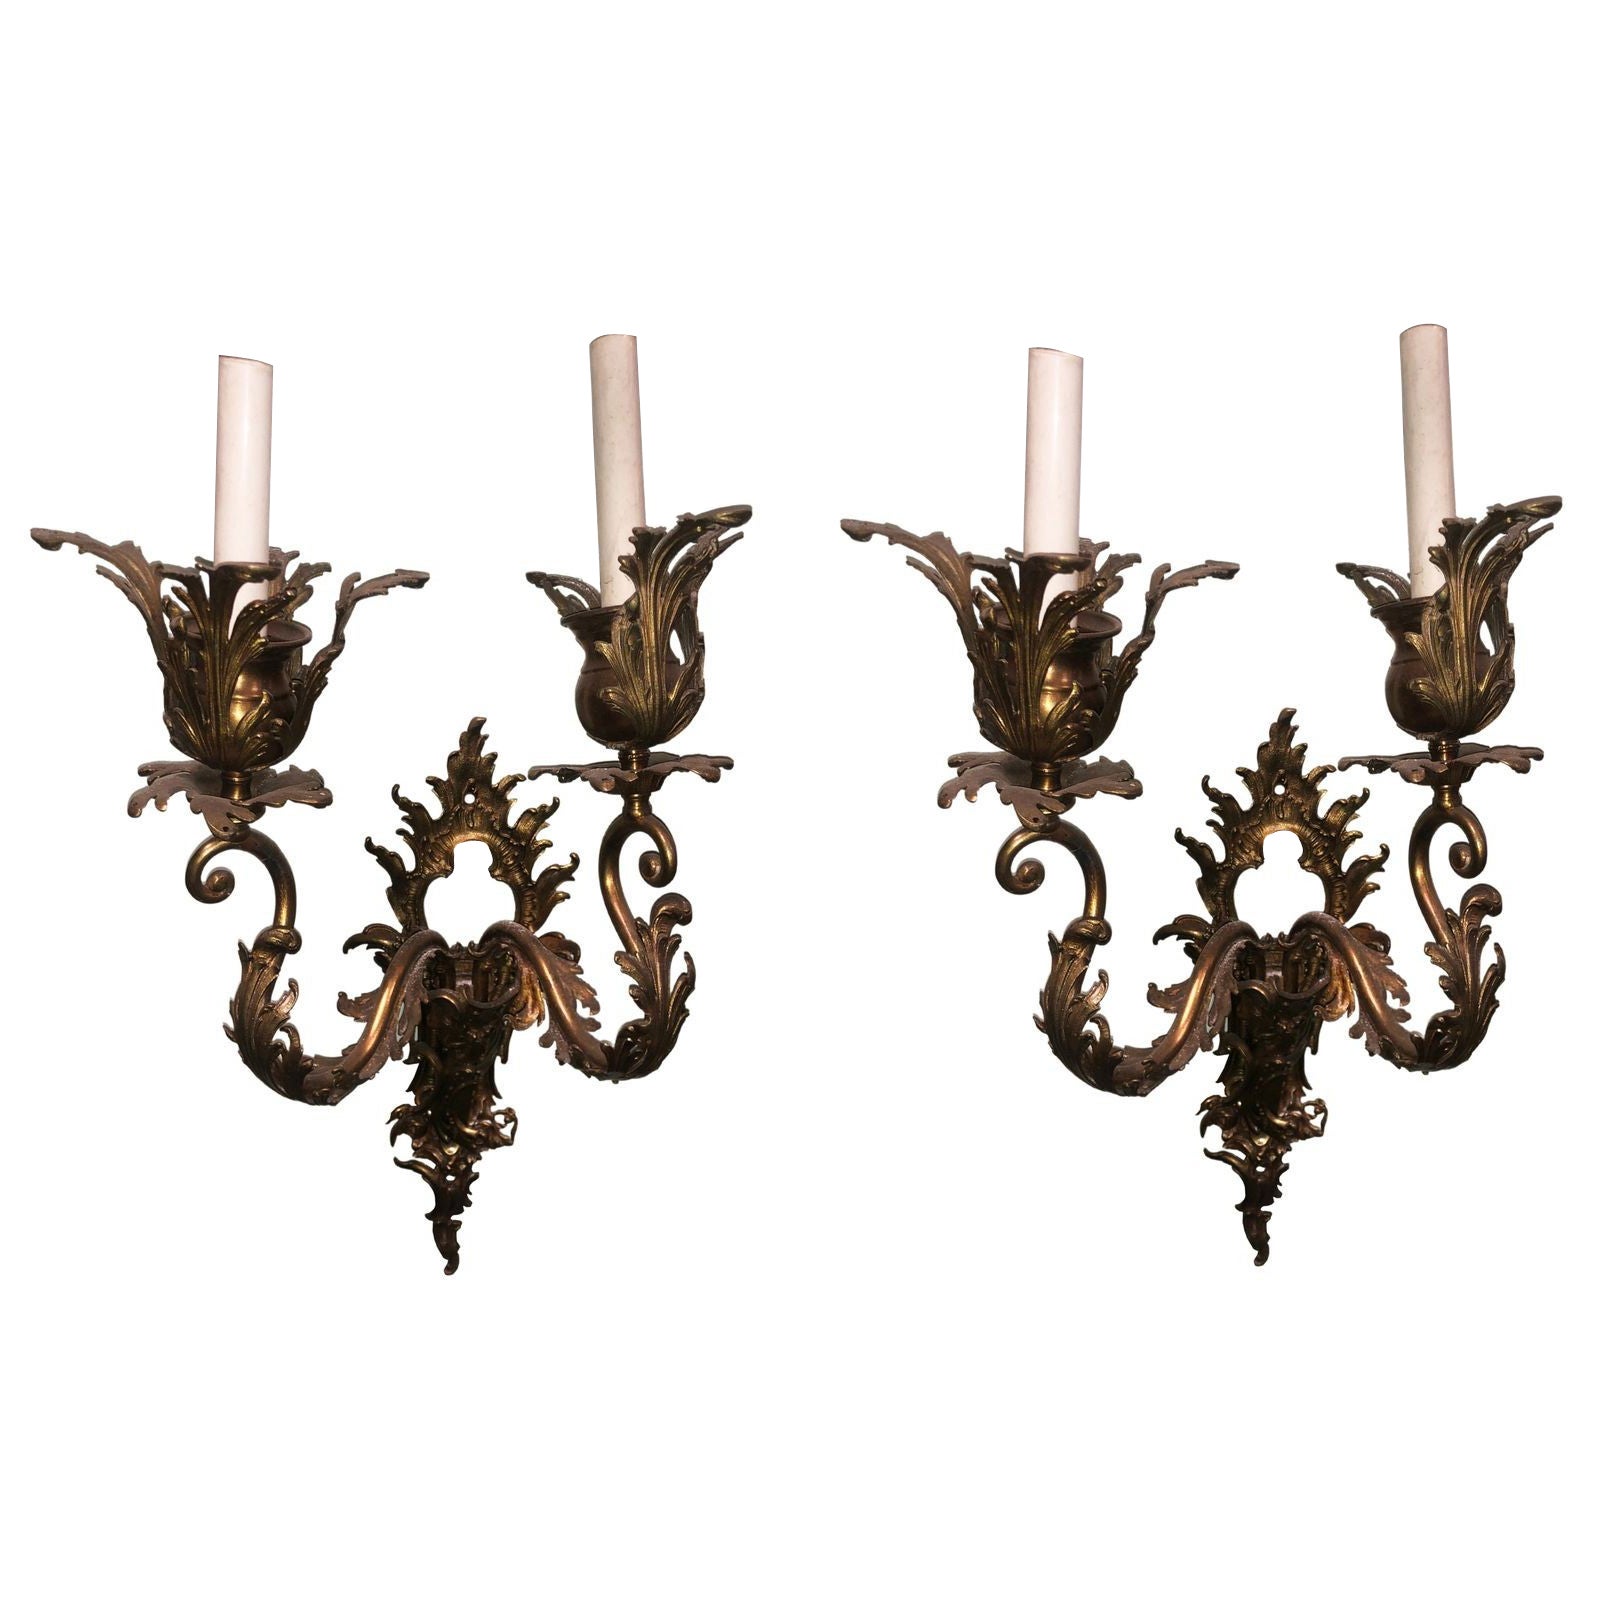 Italian Baroque Candelabra Style Wall Sconce, Pair For Sale